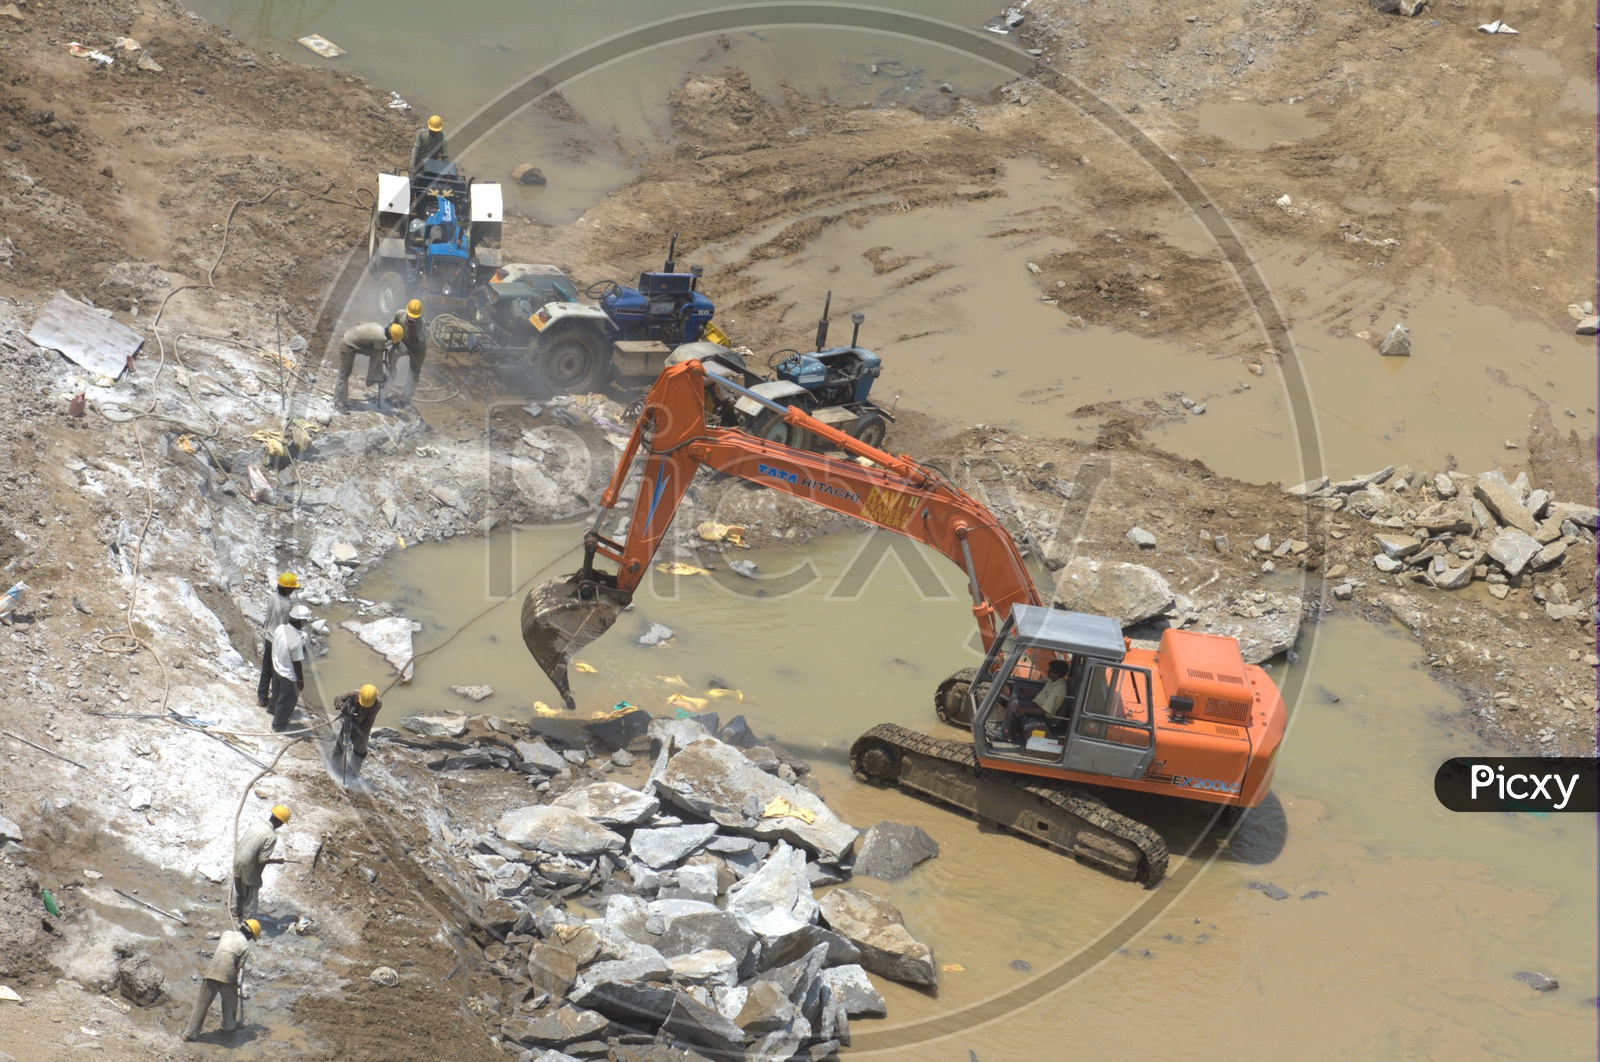 Bulldozer excavating the rock bodies alongside the labourers drilling in background at a construction site